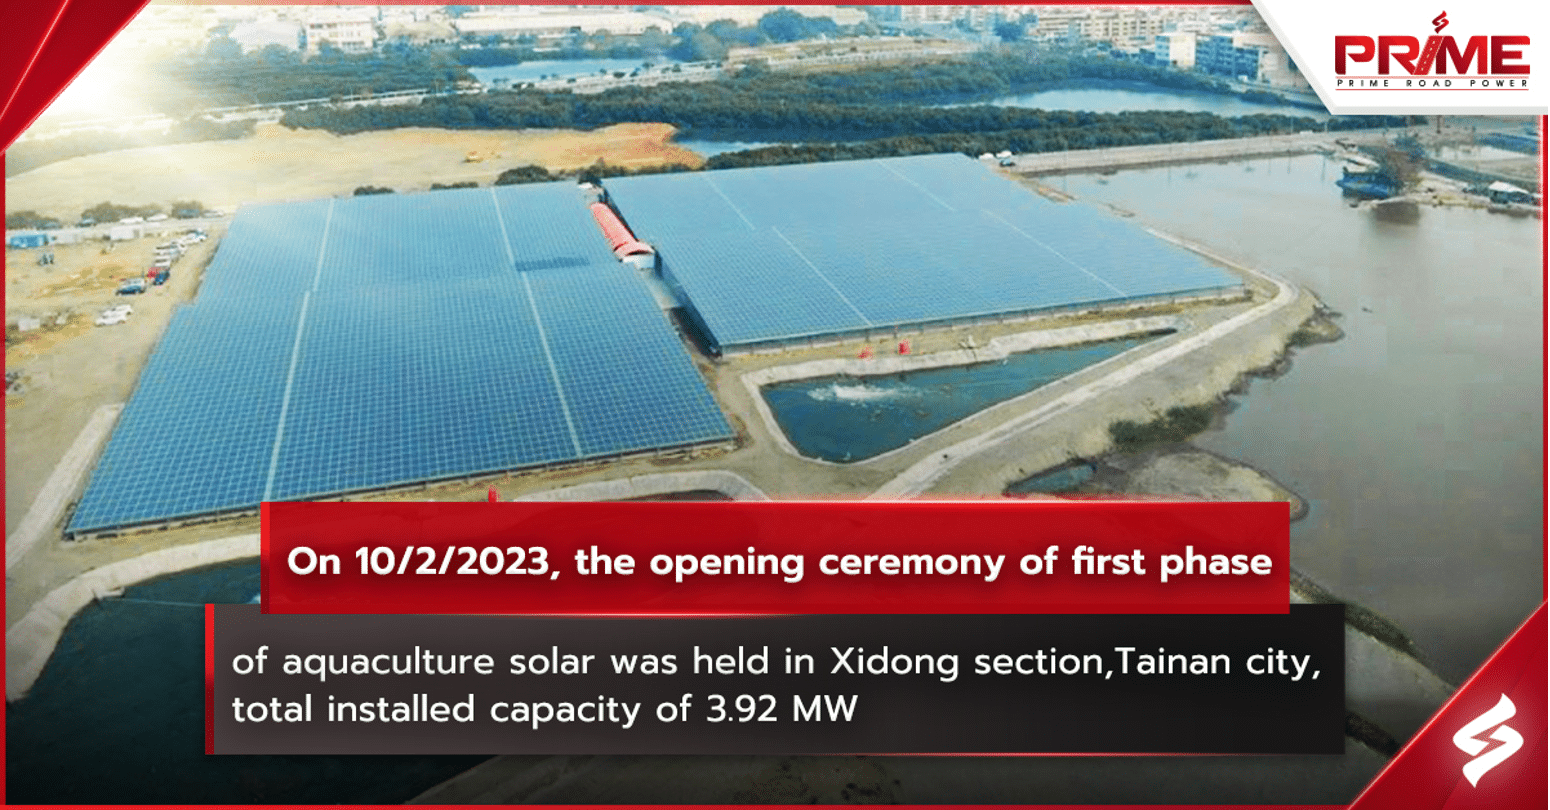 PRIME opening of the first phase of solar power plant in Taiwan